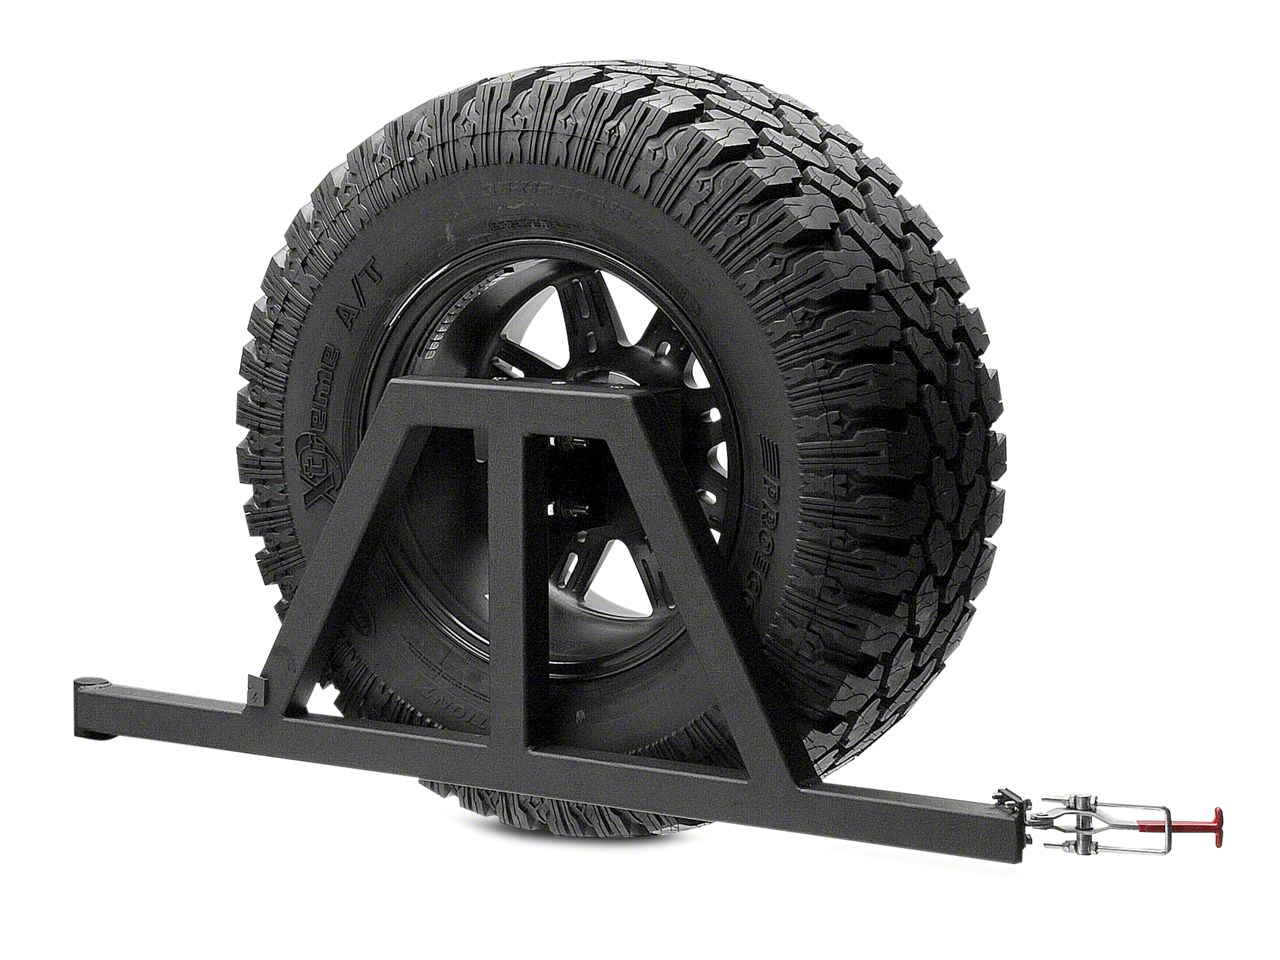 Tacoma Tire Carriers & Accessories